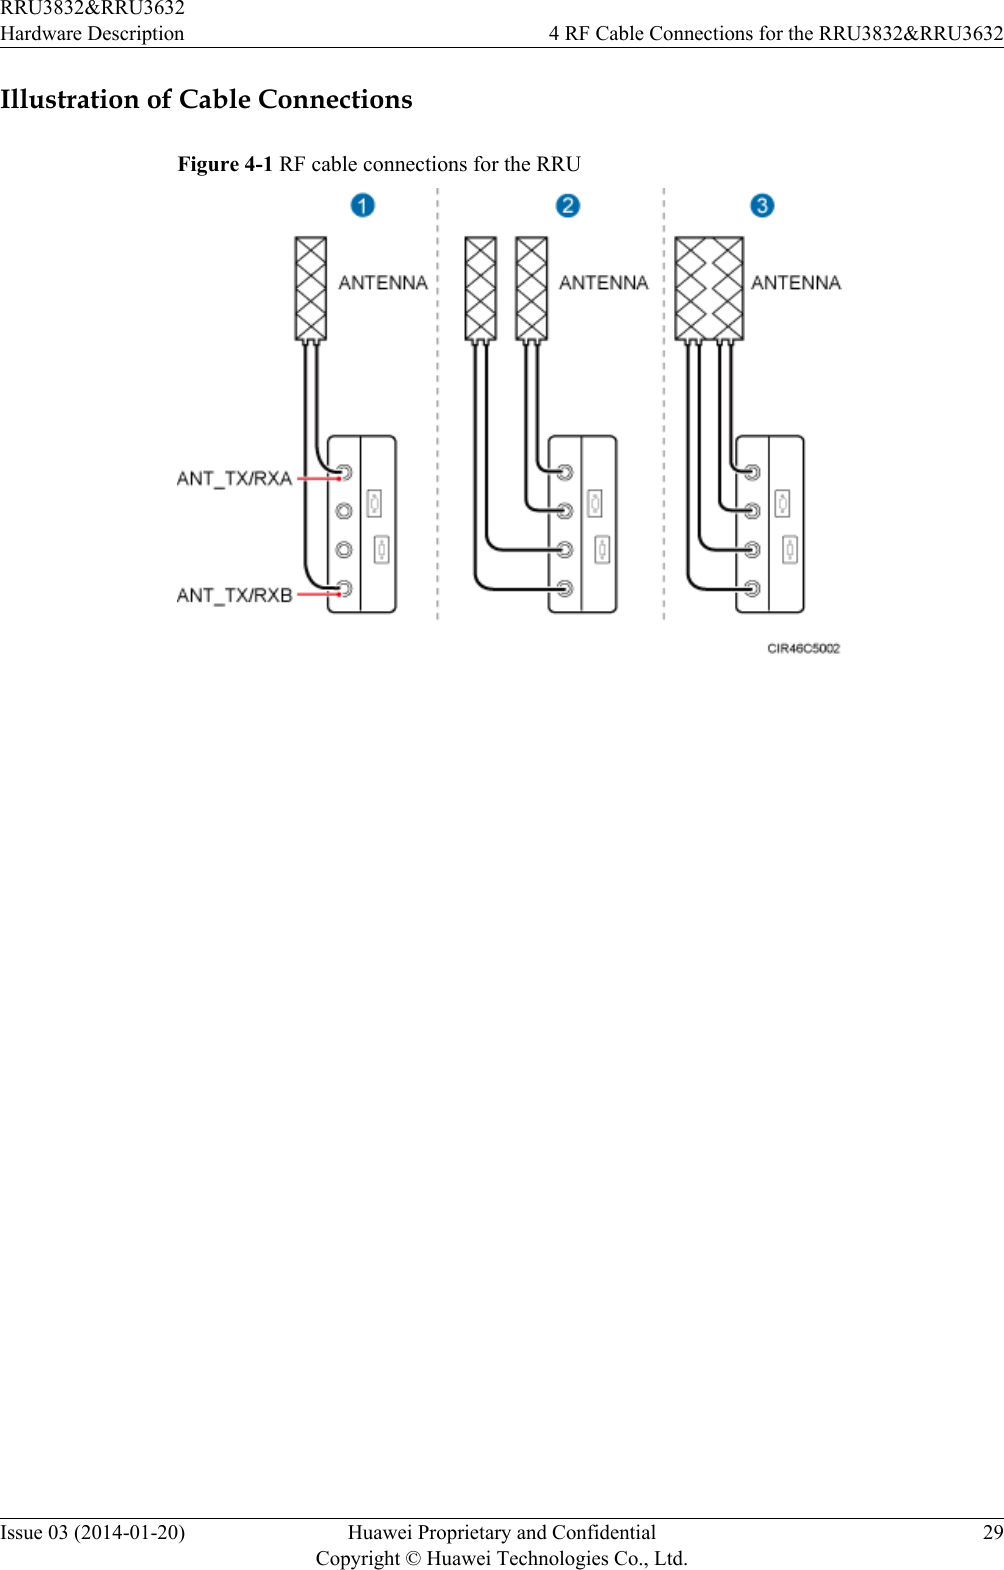 Illustration of Cable ConnectionsFigure 4-1 RF cable connections for the RRURRU3832&amp;RRU3632Hardware Description 4 RF Cable Connections for the RRU3832&amp;RRU3632Issue 03 (2014-01-20) Huawei Proprietary and ConfidentialCopyright © Huawei Technologies Co., Ltd.29